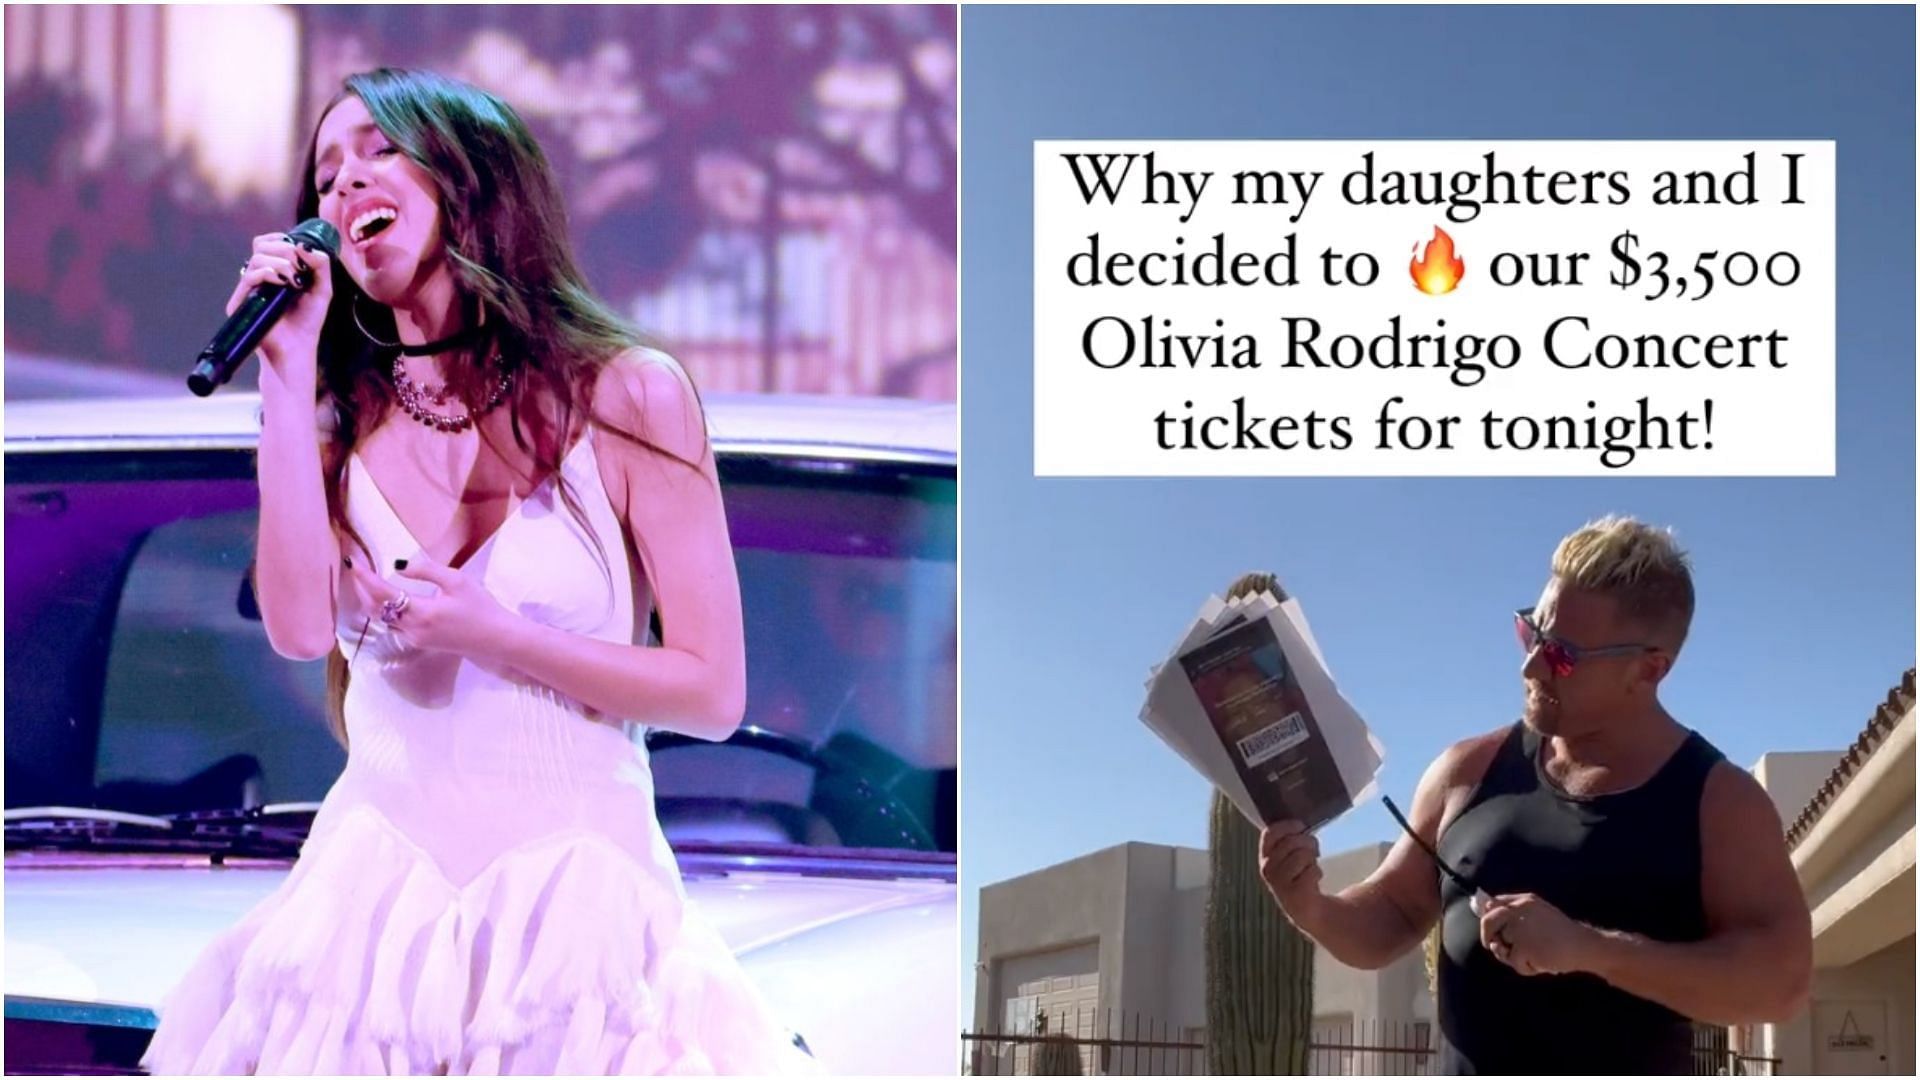 Dad trolled for burning $3500 Olivia Rodrigo concert tickets (Images via Getty and Twitter)